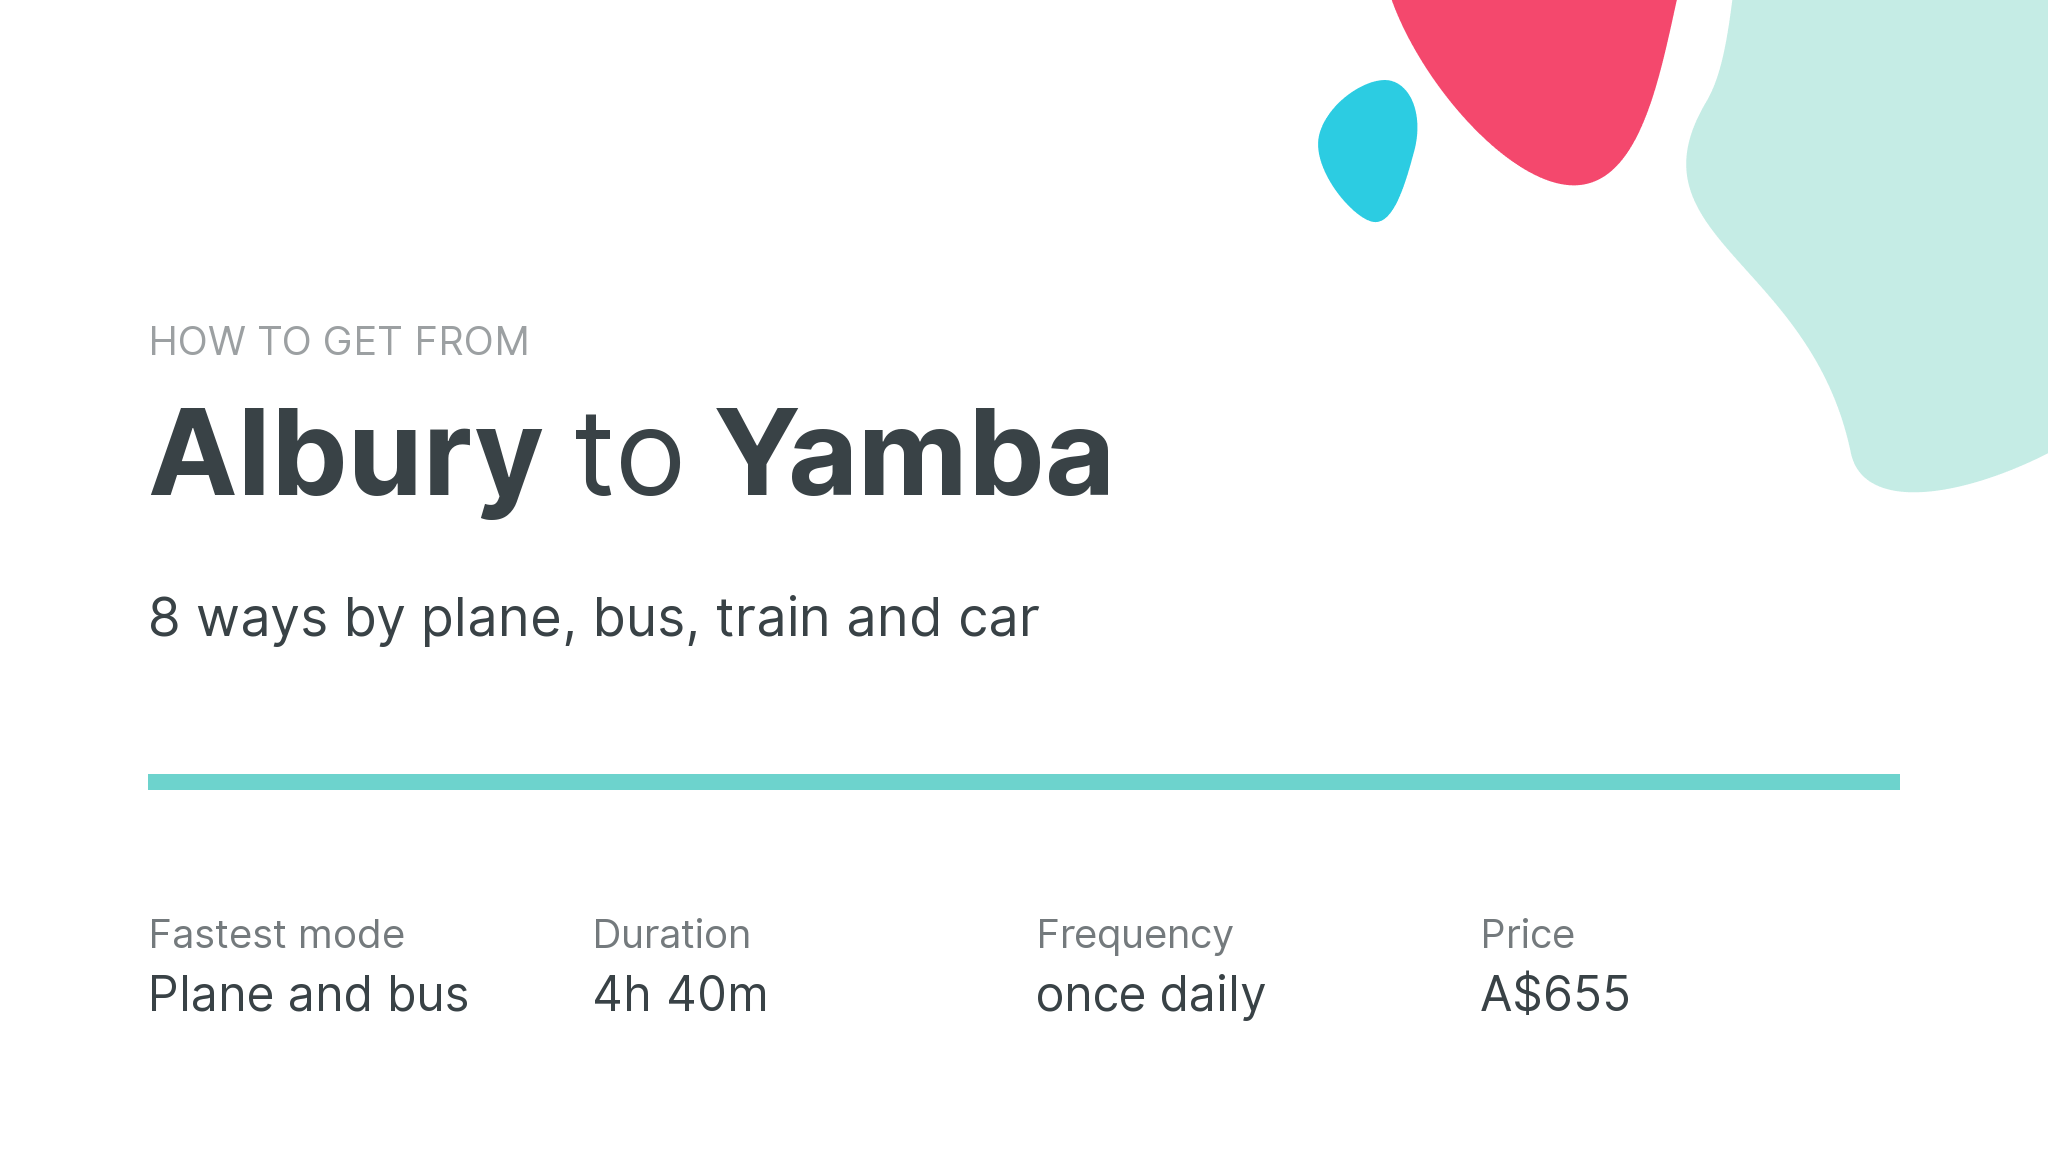 How do I get from Albury to Yamba